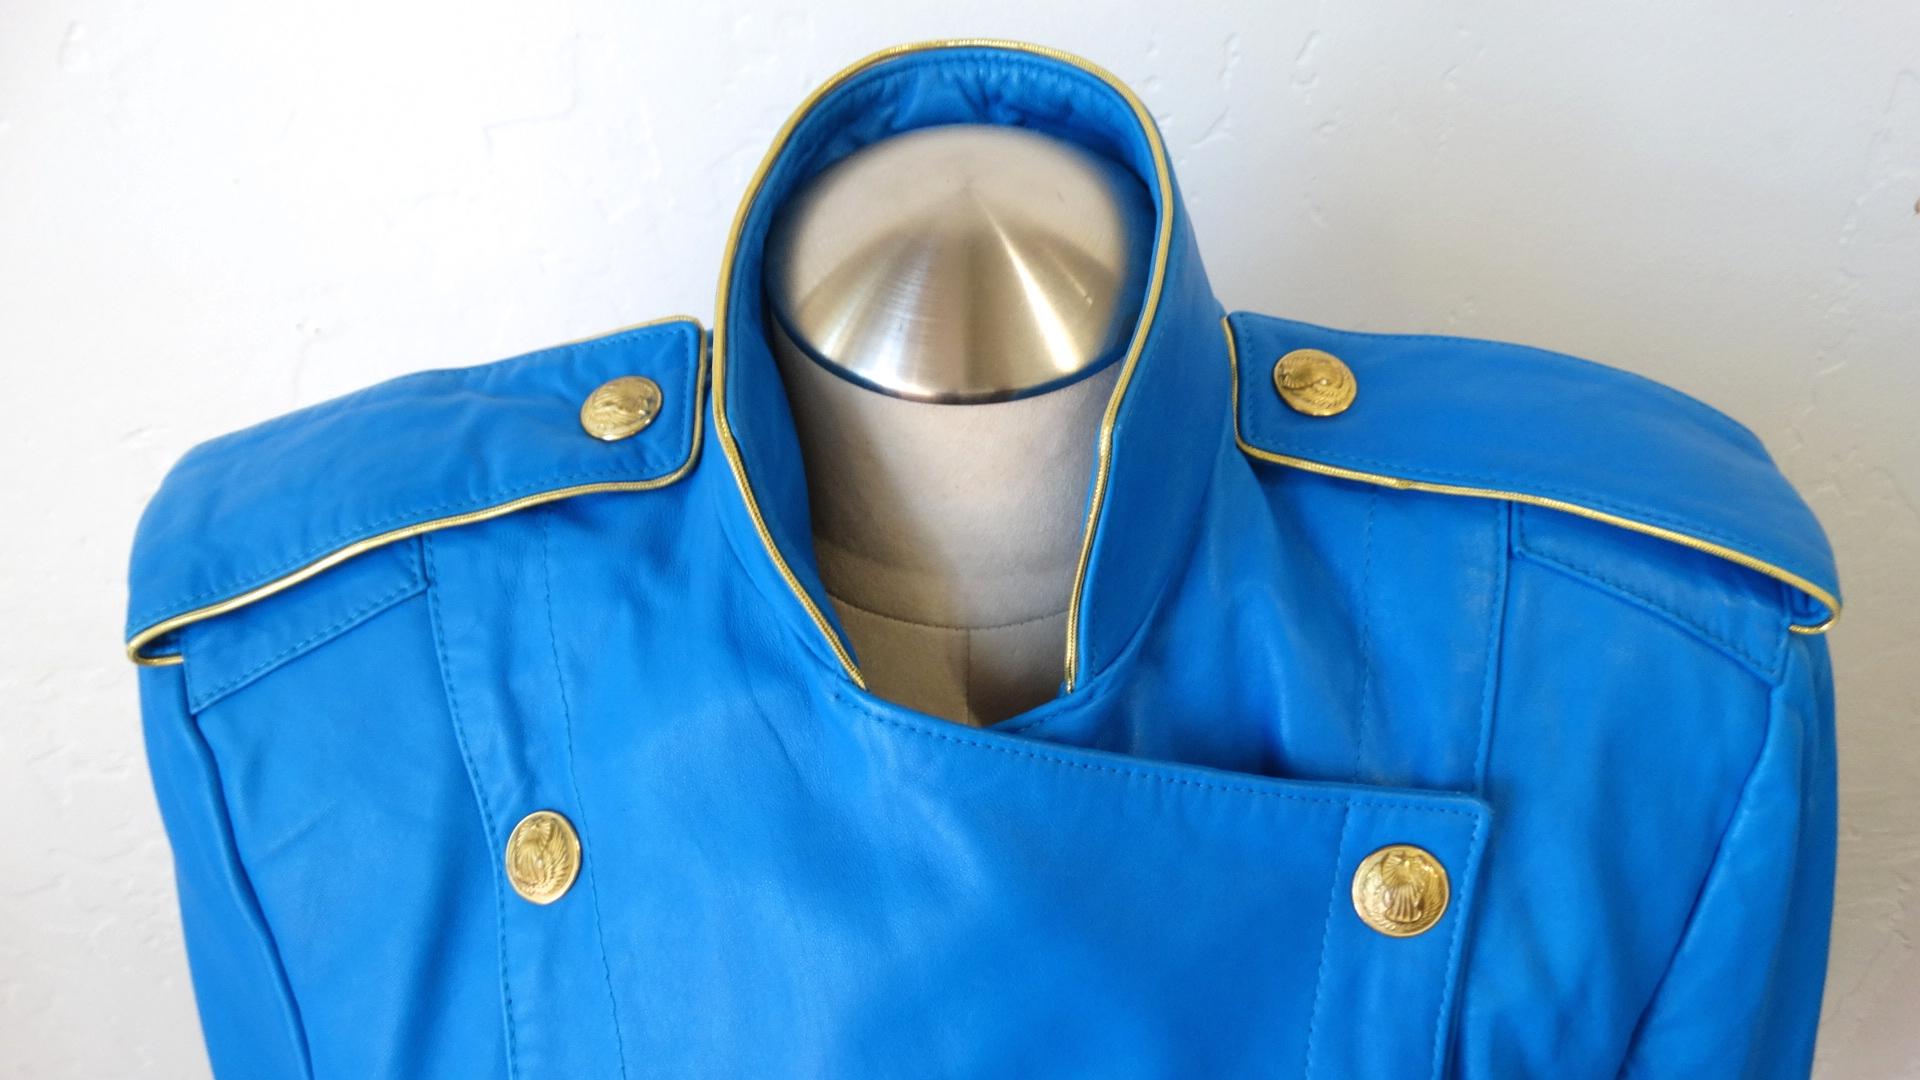 Create The Outfit Of Your Dreams With This Michael Hoban Leather Jacket! Circa 1980s, this bright blue military style double-breasted leather jacket features gold tone embossed buttons, strong shoulders and a high standing collar. The strong